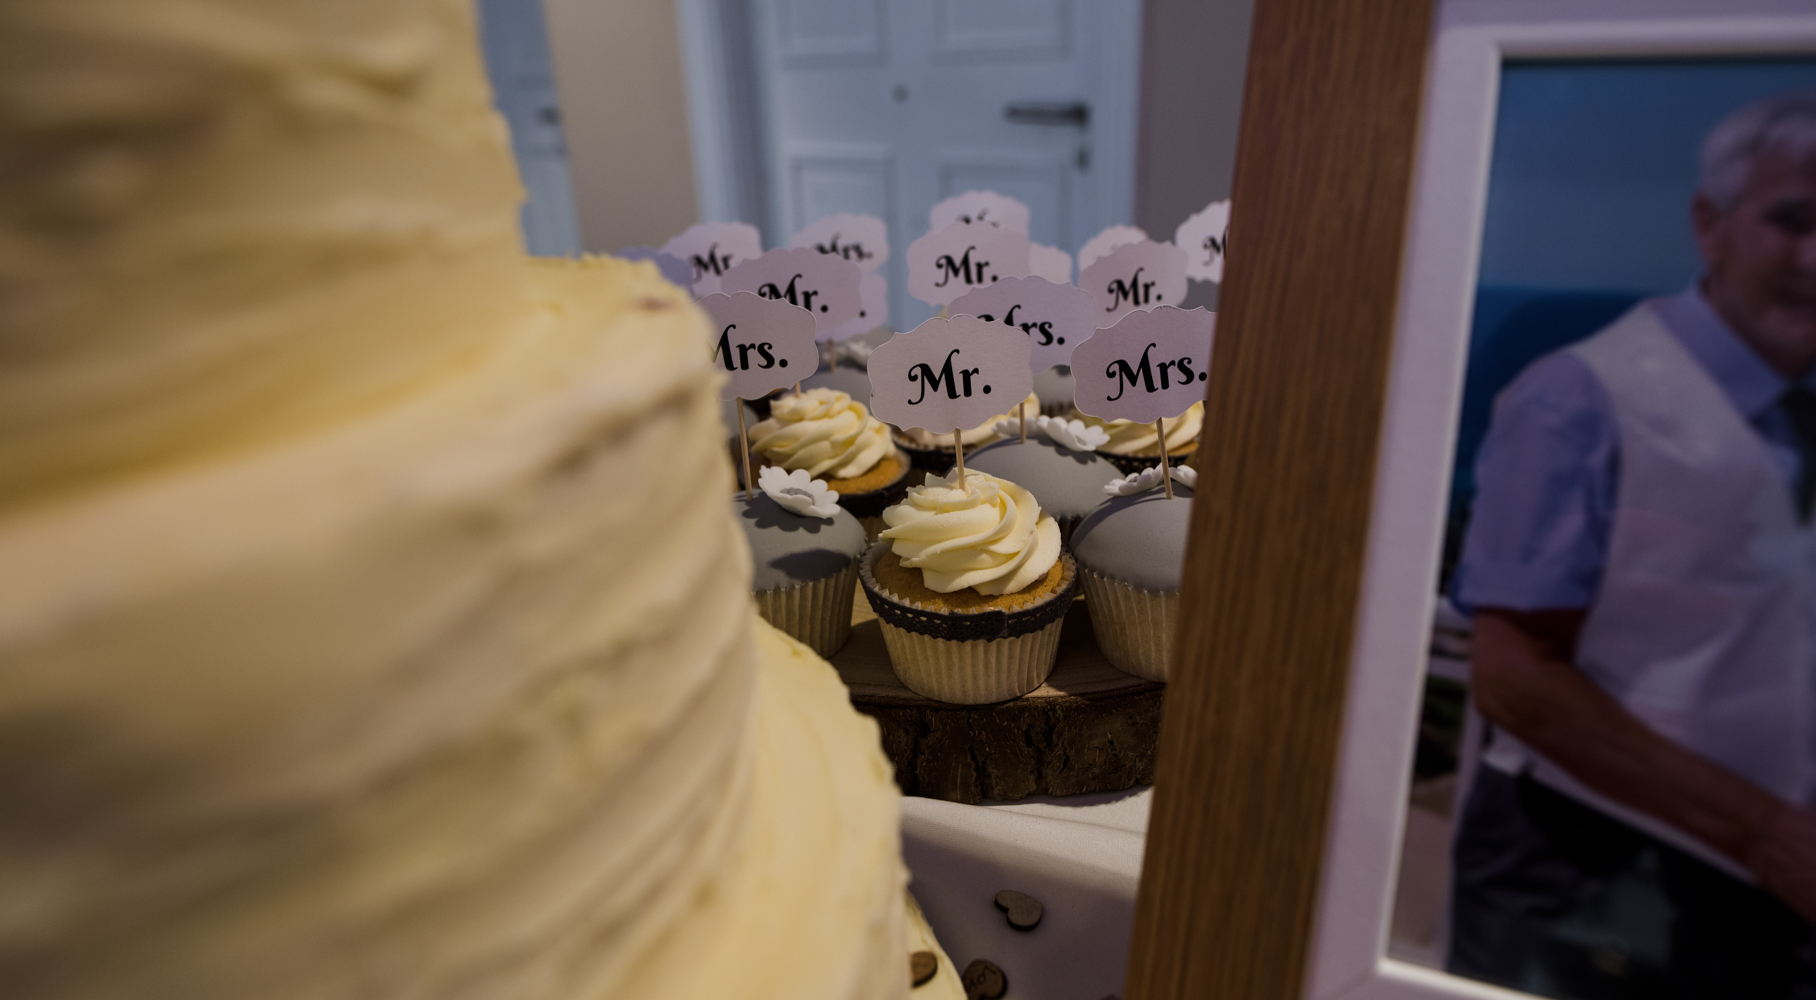 Lovely cup cakes to accompany the wedding cake